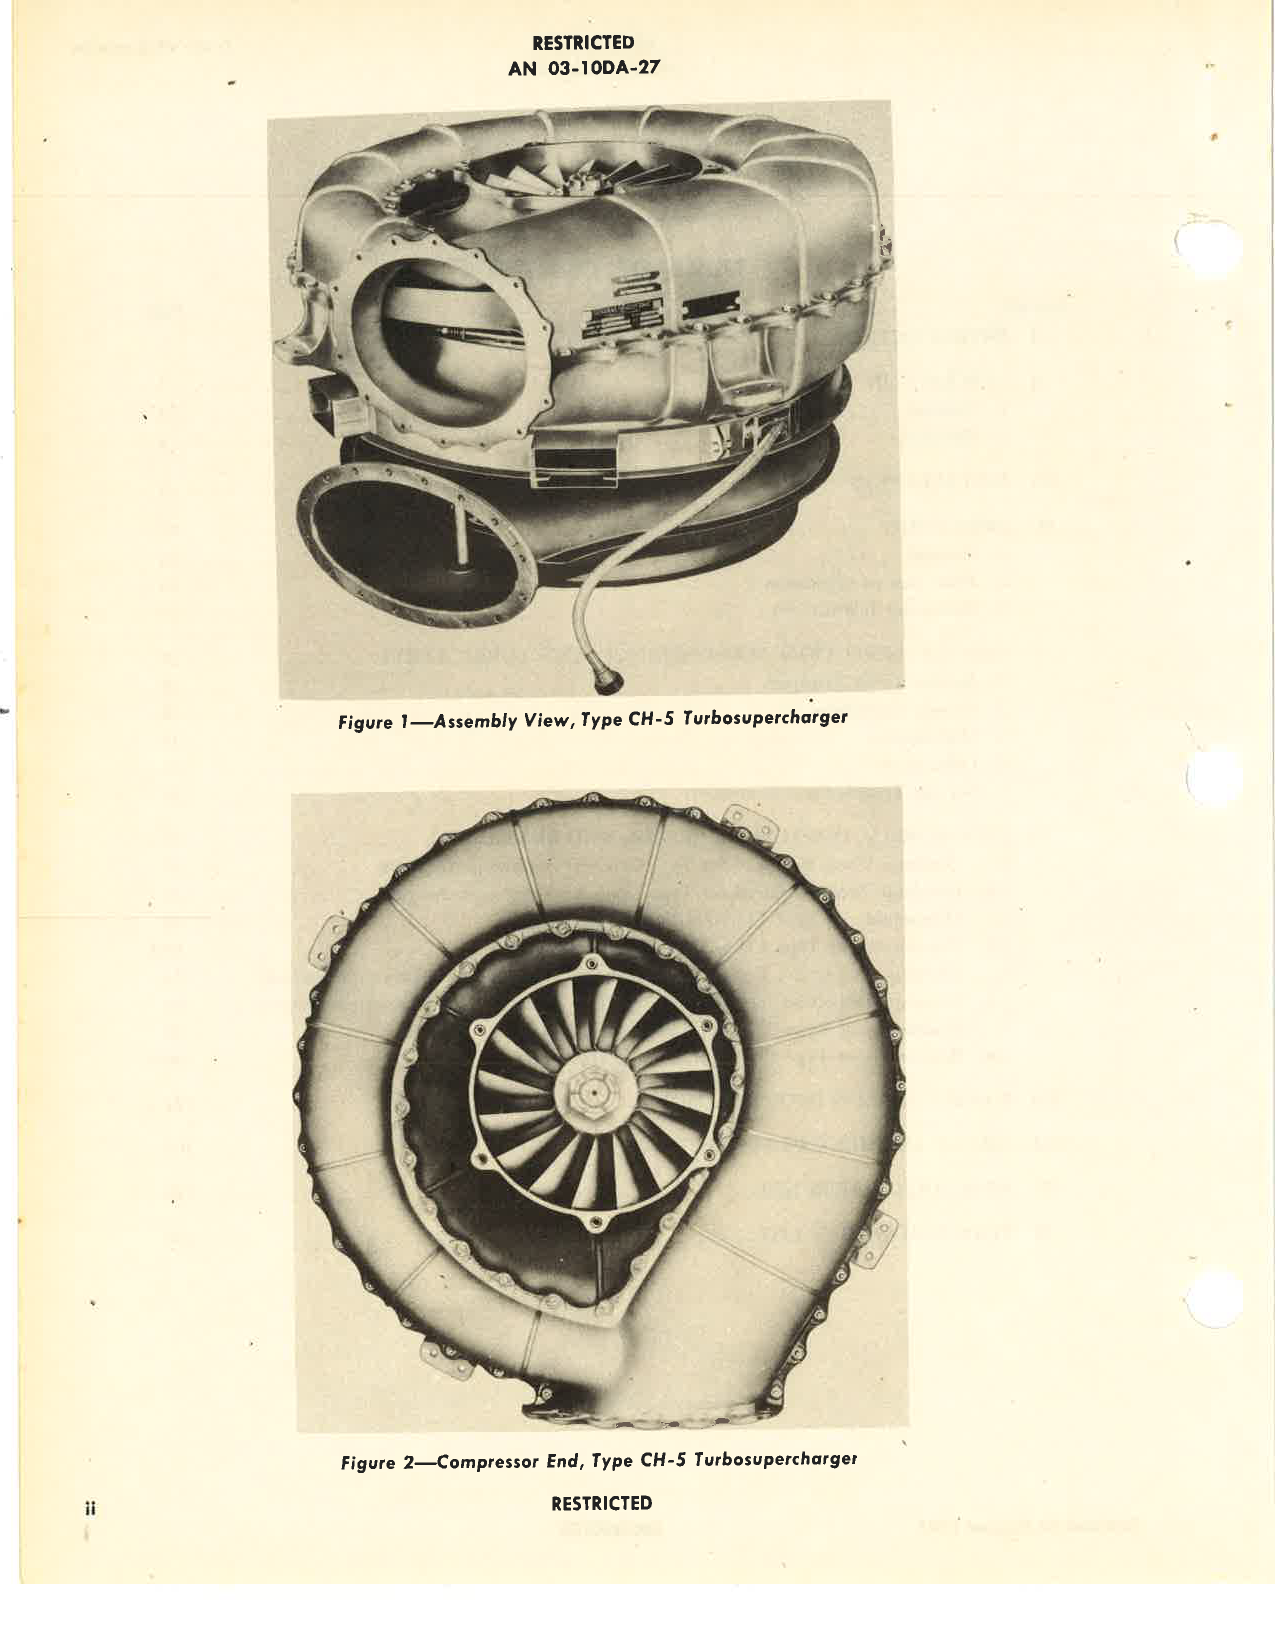 Sample page 6 from AirCorps Library document: Operation, Service, & Overhaul Instructions with Parts Catalog for Turbosuperchargers CH-5 Series